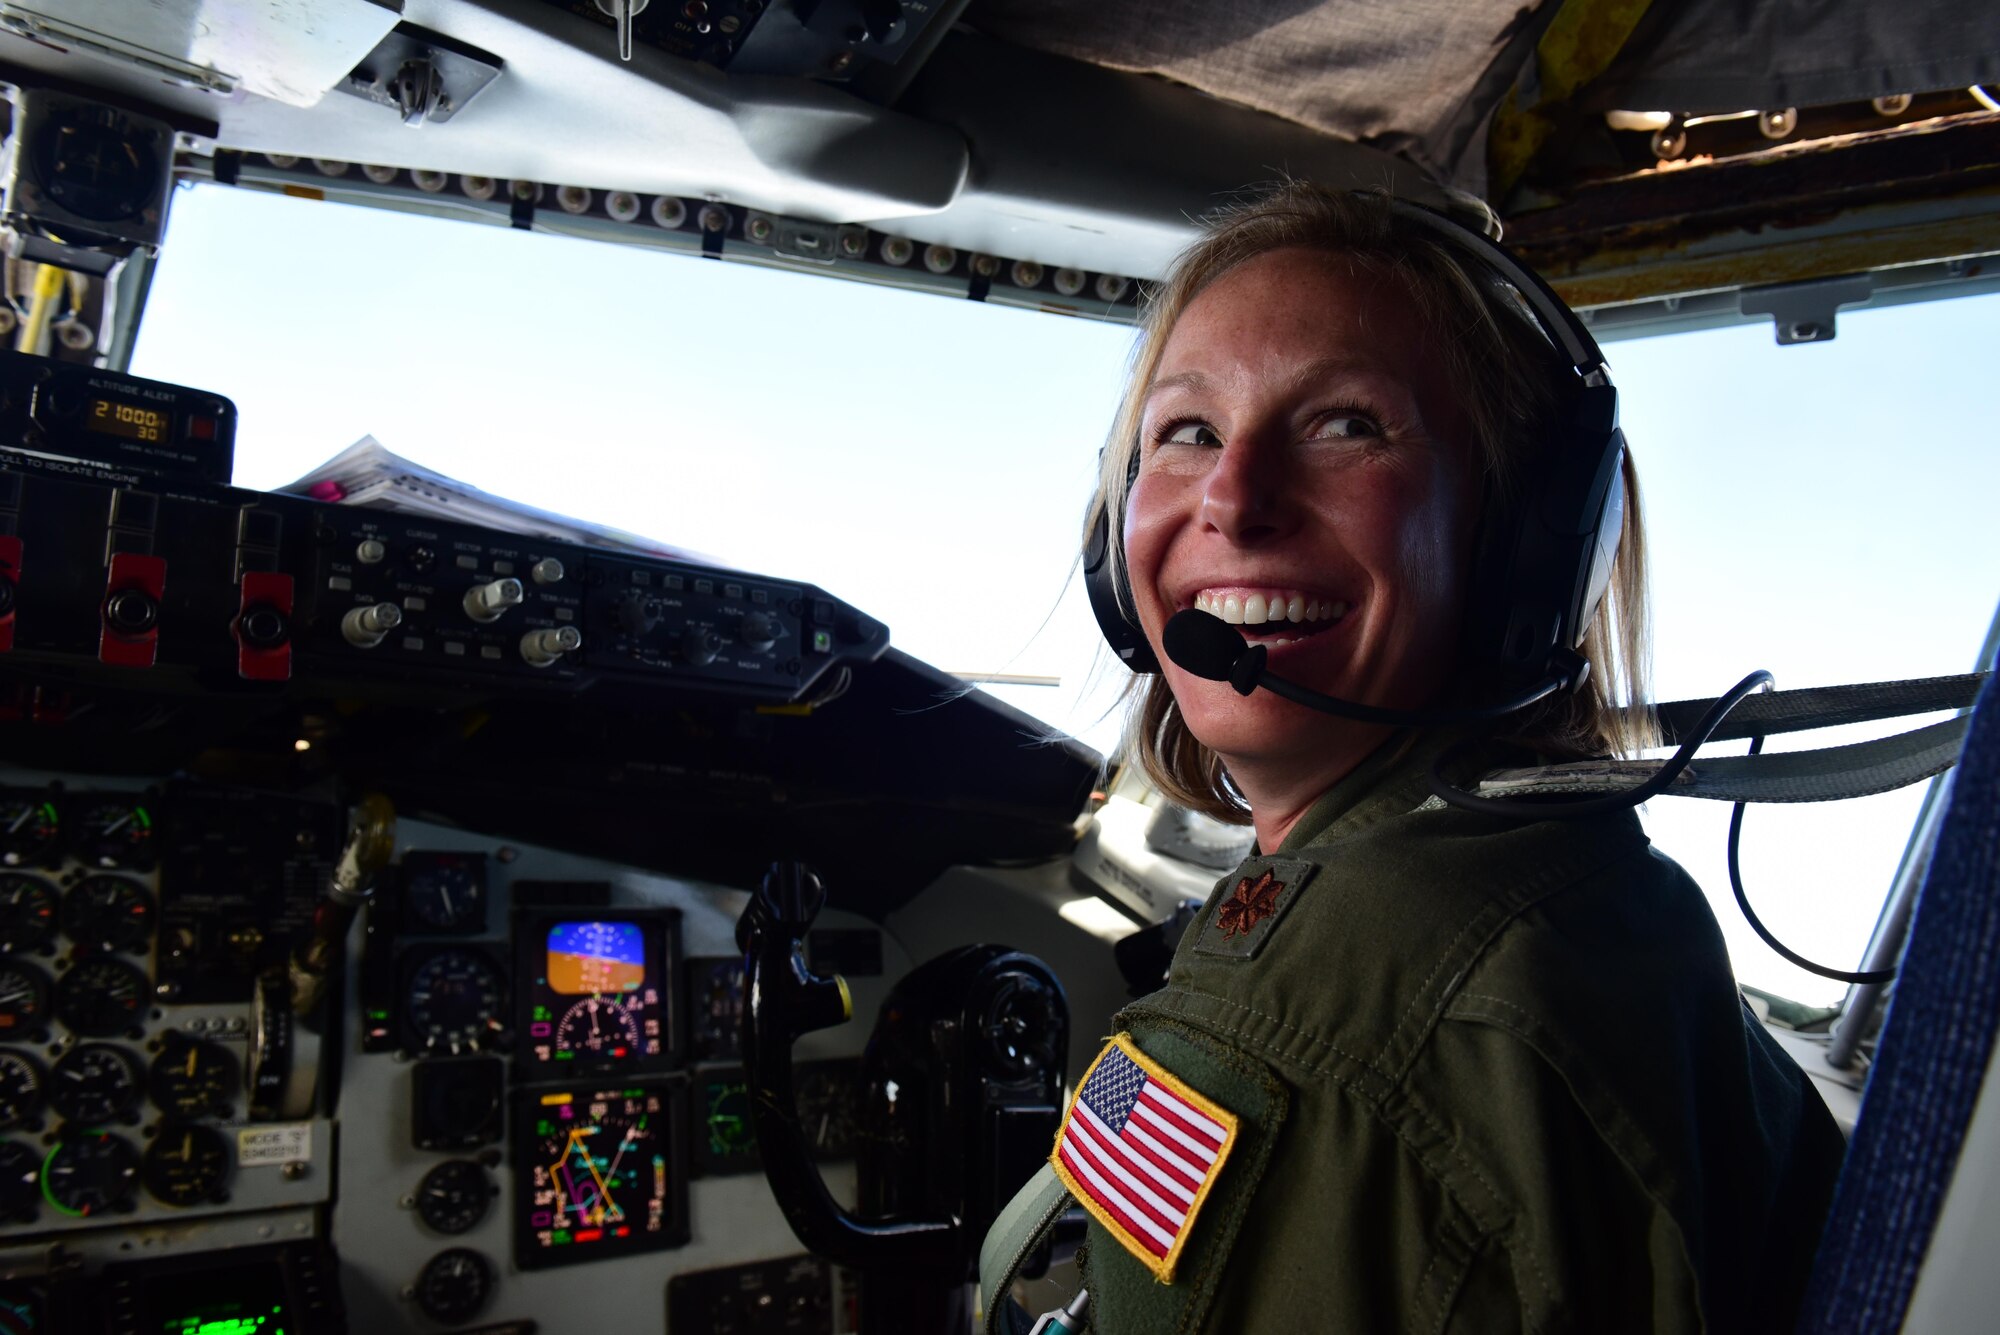 Maj. Amanda Person, 7th Air Refueling Squadron, KC-135R Stratotanker pilot, flies local civic leaders including North Carolina Lt. Governor Dan Forest, May 18, 2017, in the skies over Seymour Johnson Air Force Base, North Carolina. Seymour Johnson AFB will host Wings Over Wayne Air Show, May 20-21, 2017. (U.S. Air Force photo by Airman 1st Class Kenneth Boyton)